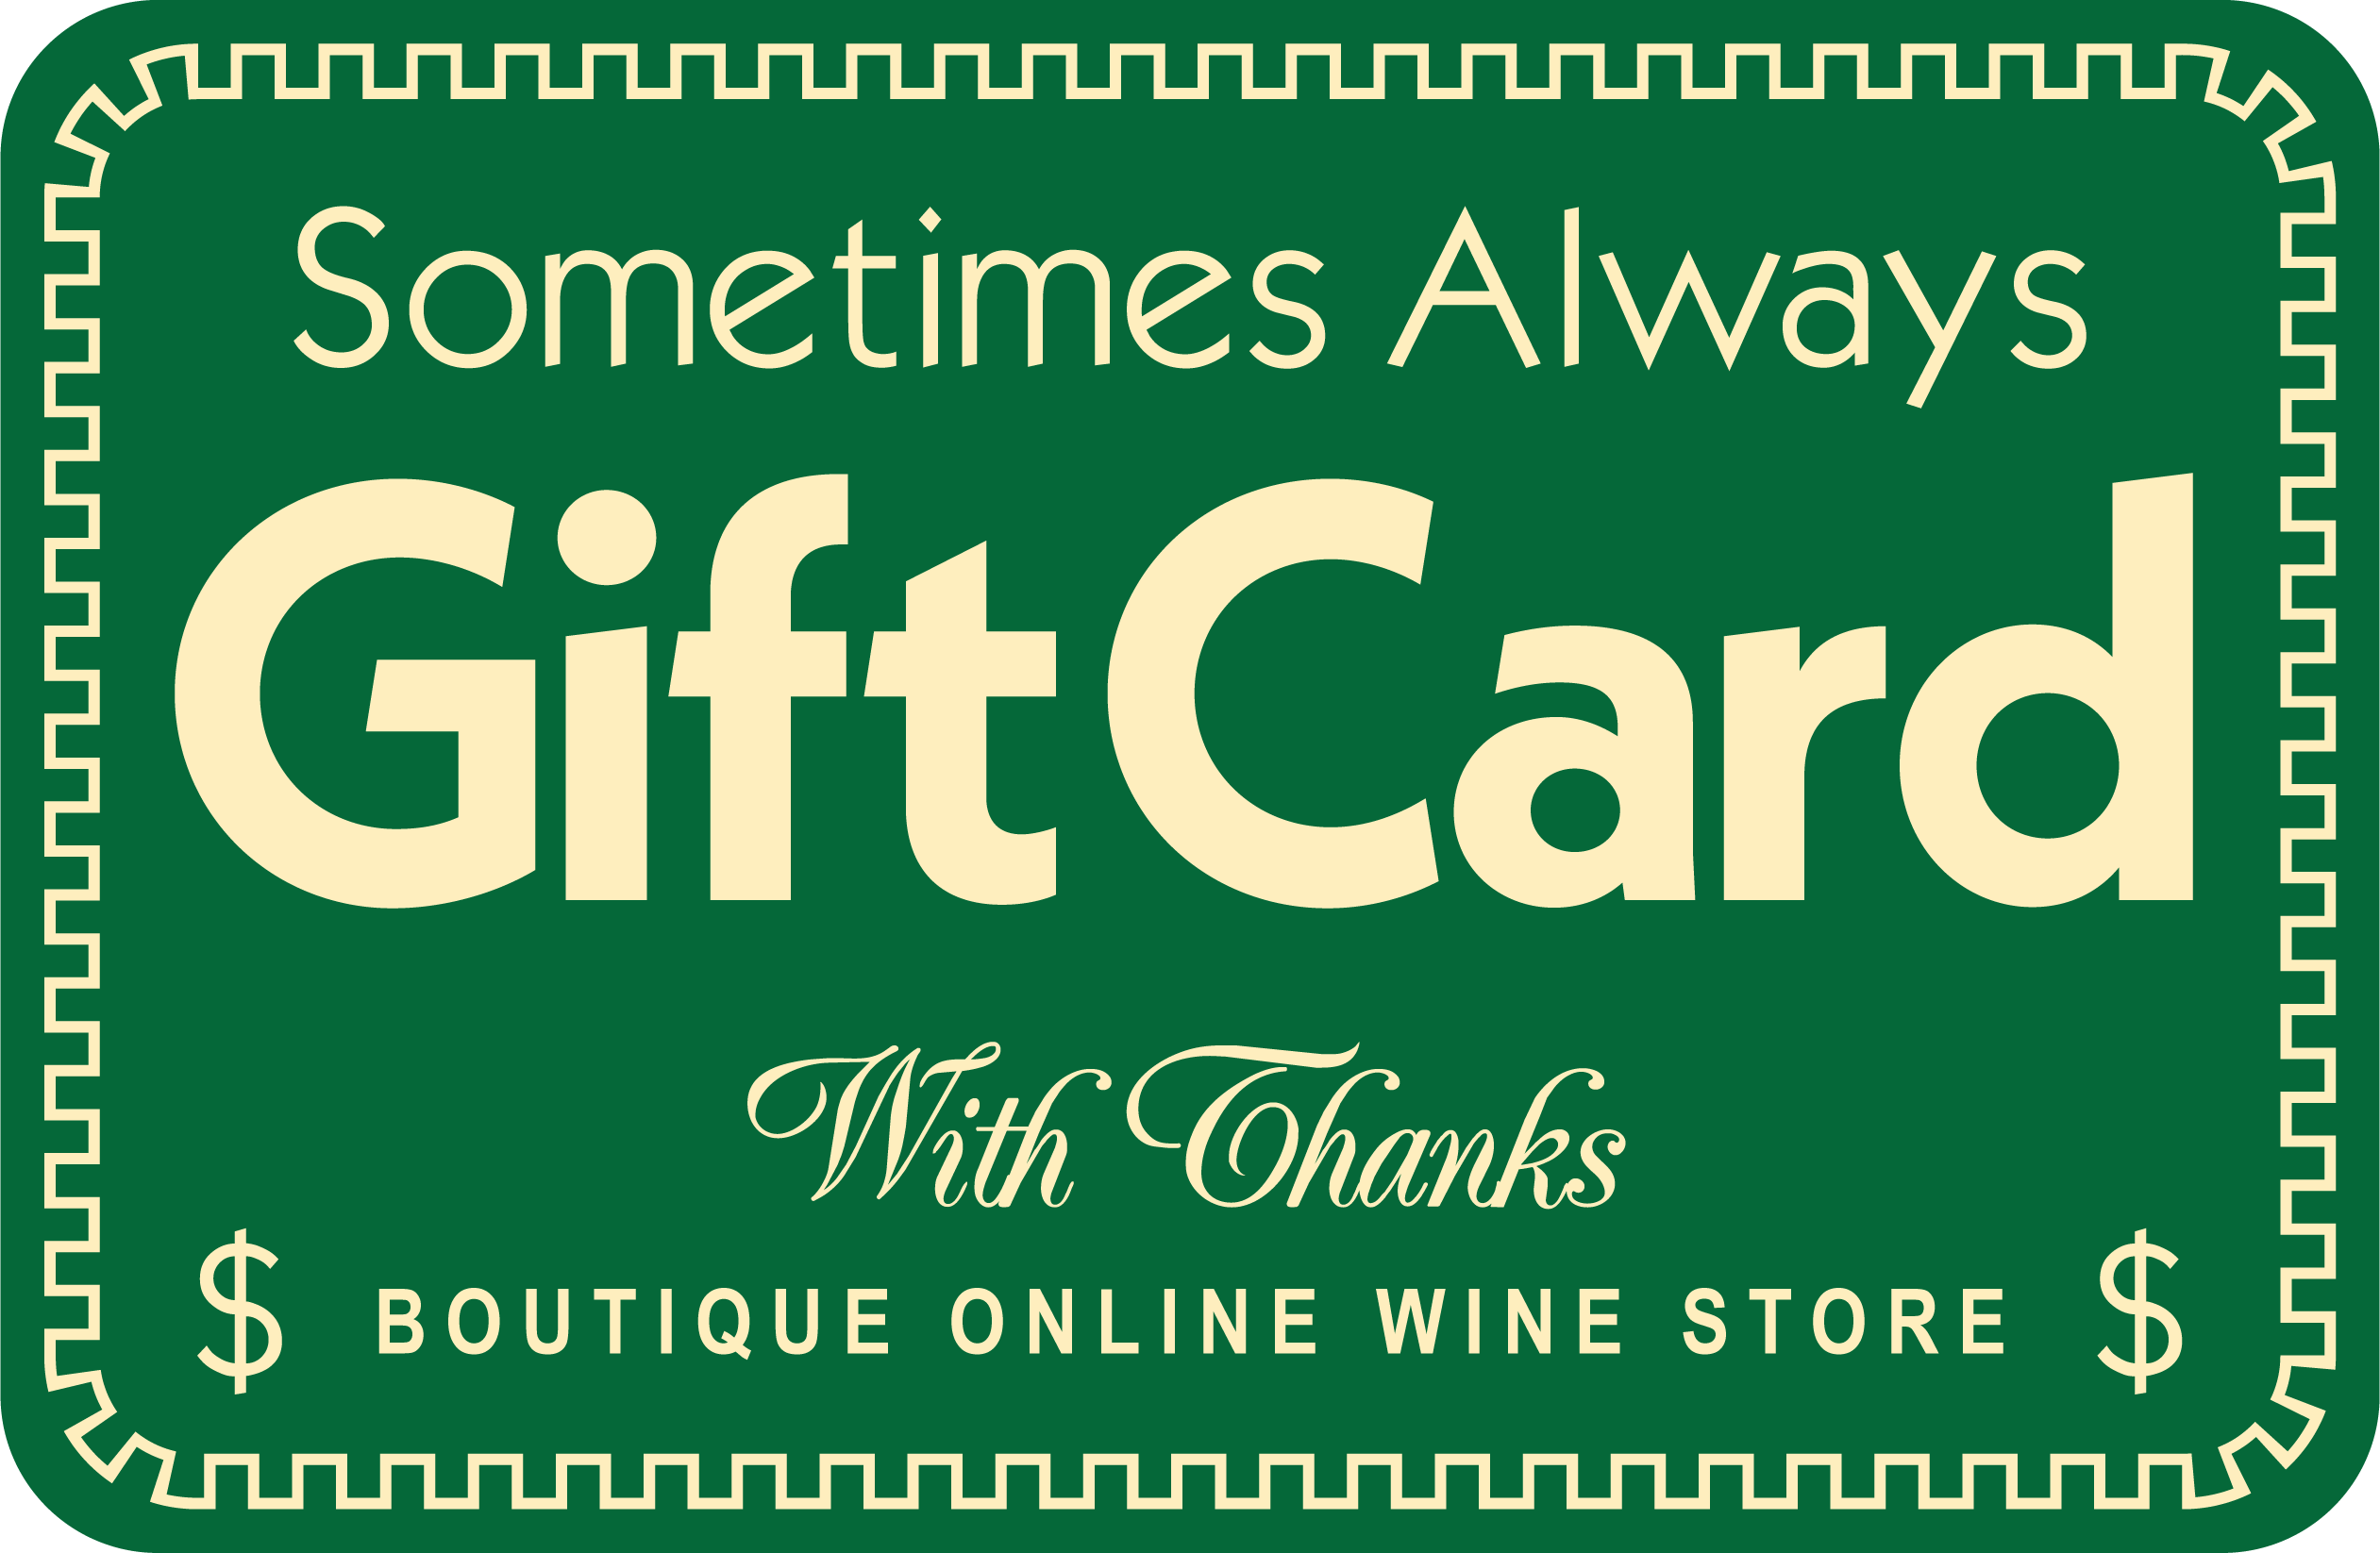 Sometimes Always E-Gift Card Gift Card